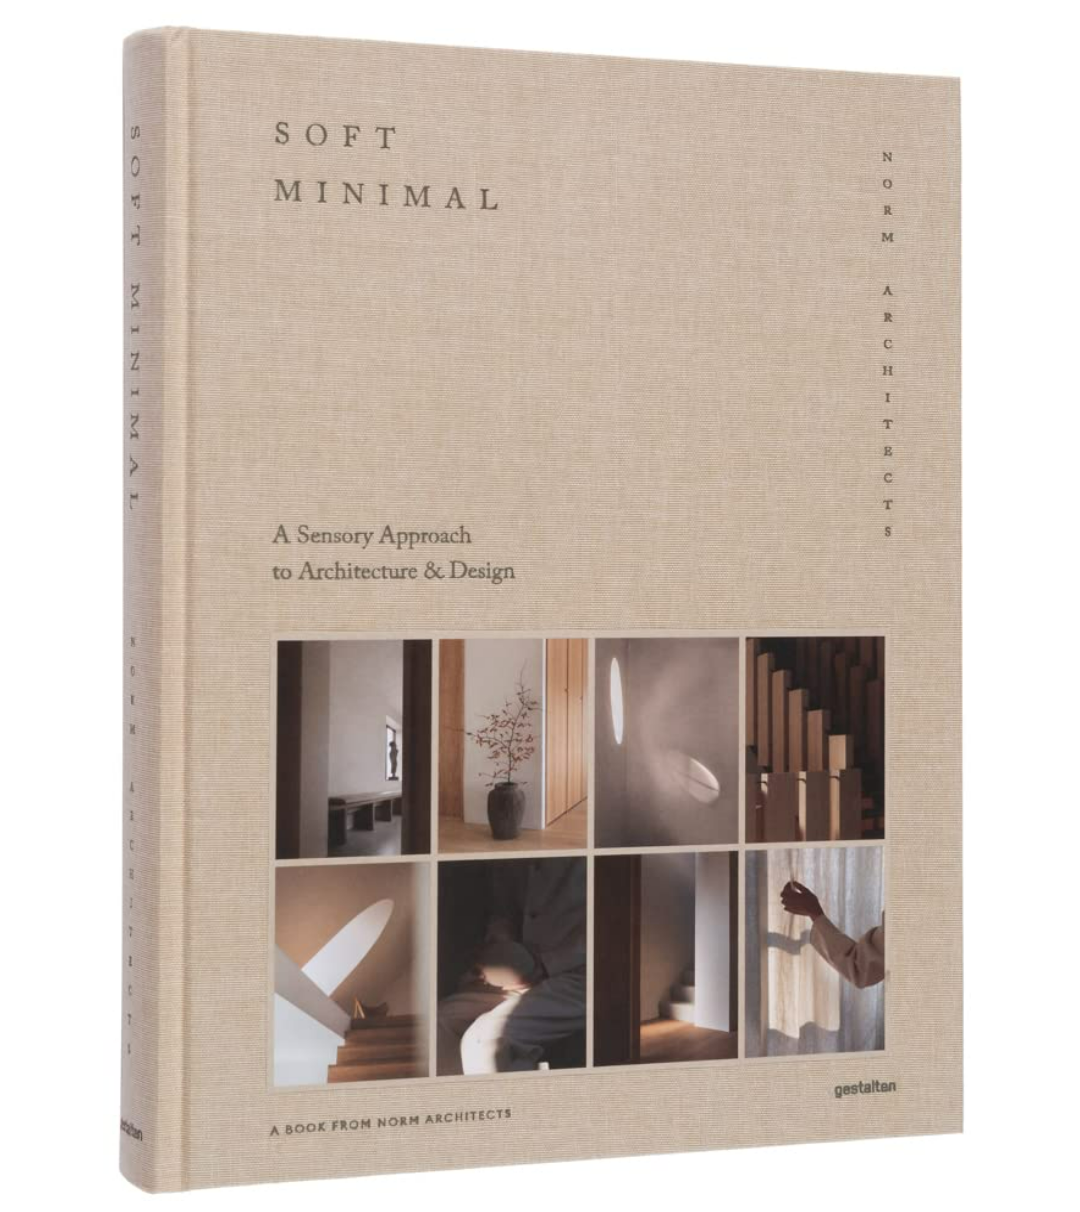 Soft Minimal: Norm Architects: A Sensory Approach to Architecture and Design